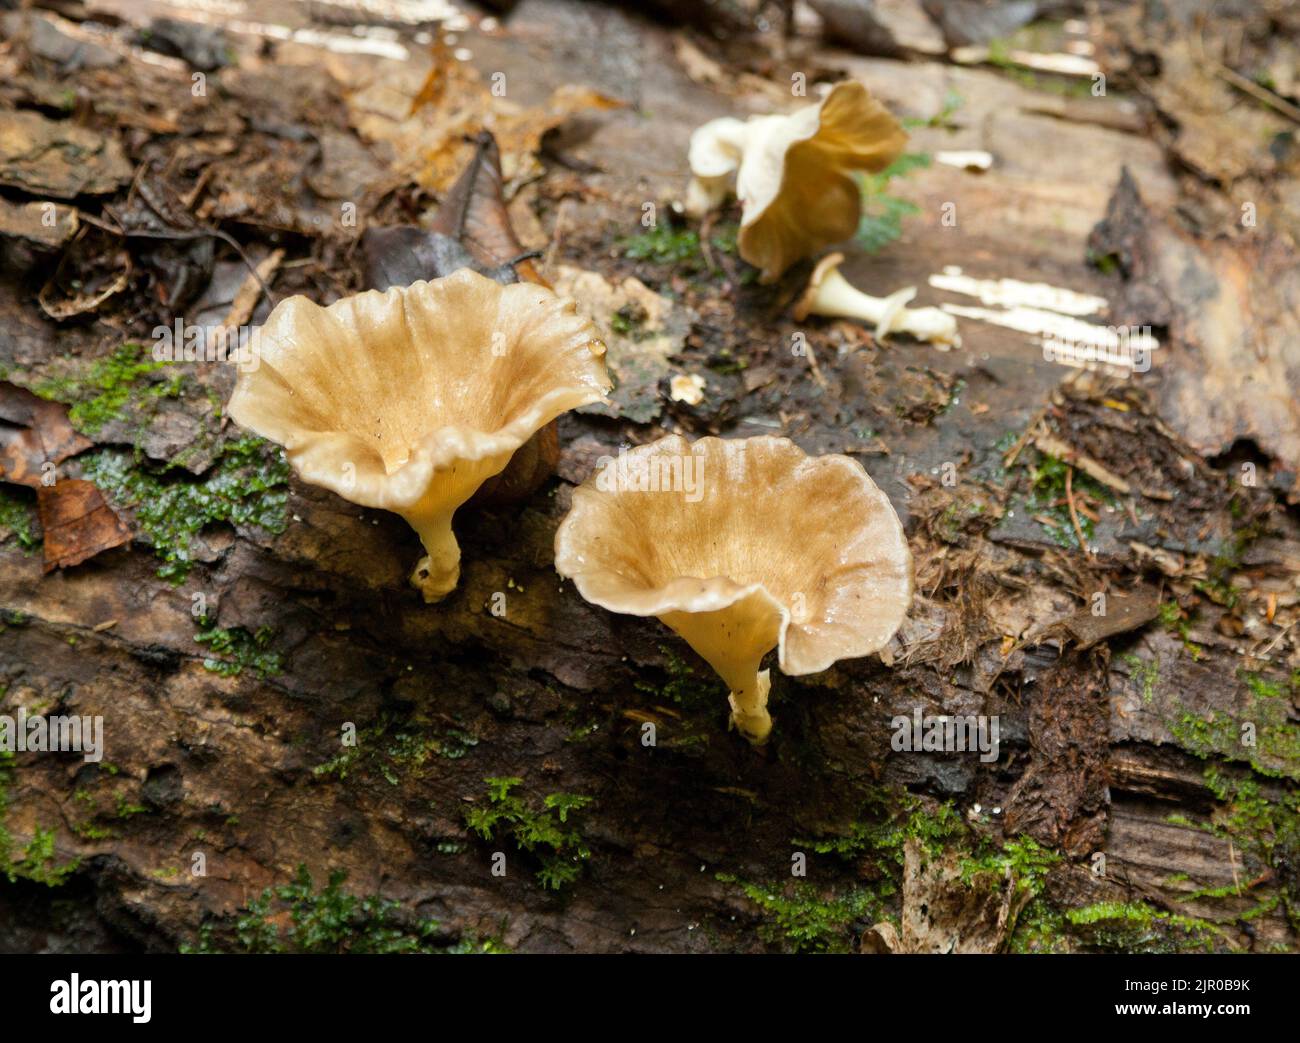 Cameron Highlands, Malaysia, forest fungi growing on rotten timber Stock Photo